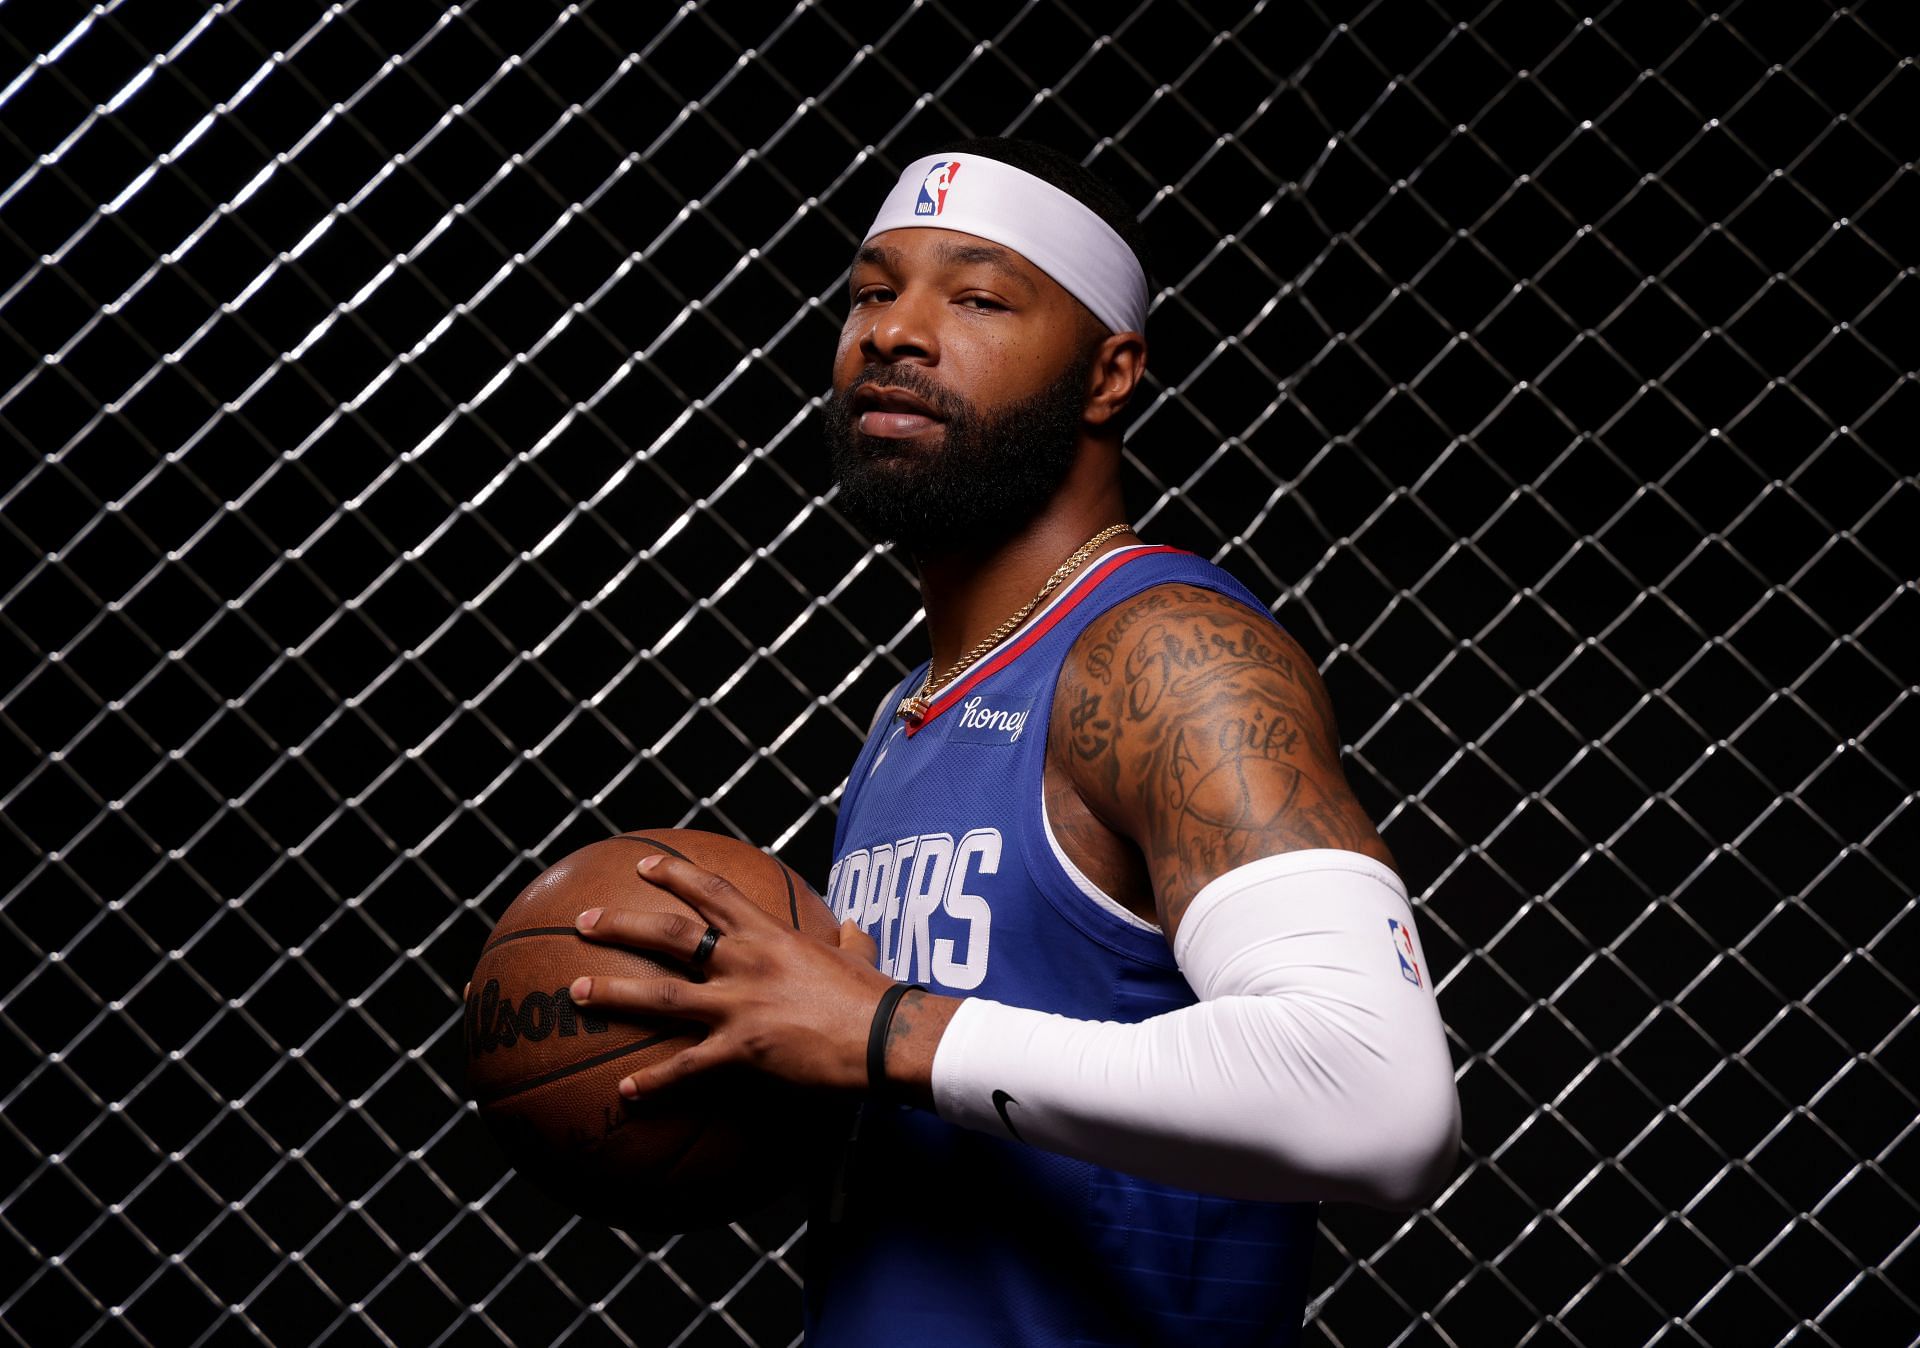 Markieff Morris was one of the players who changed his jersey